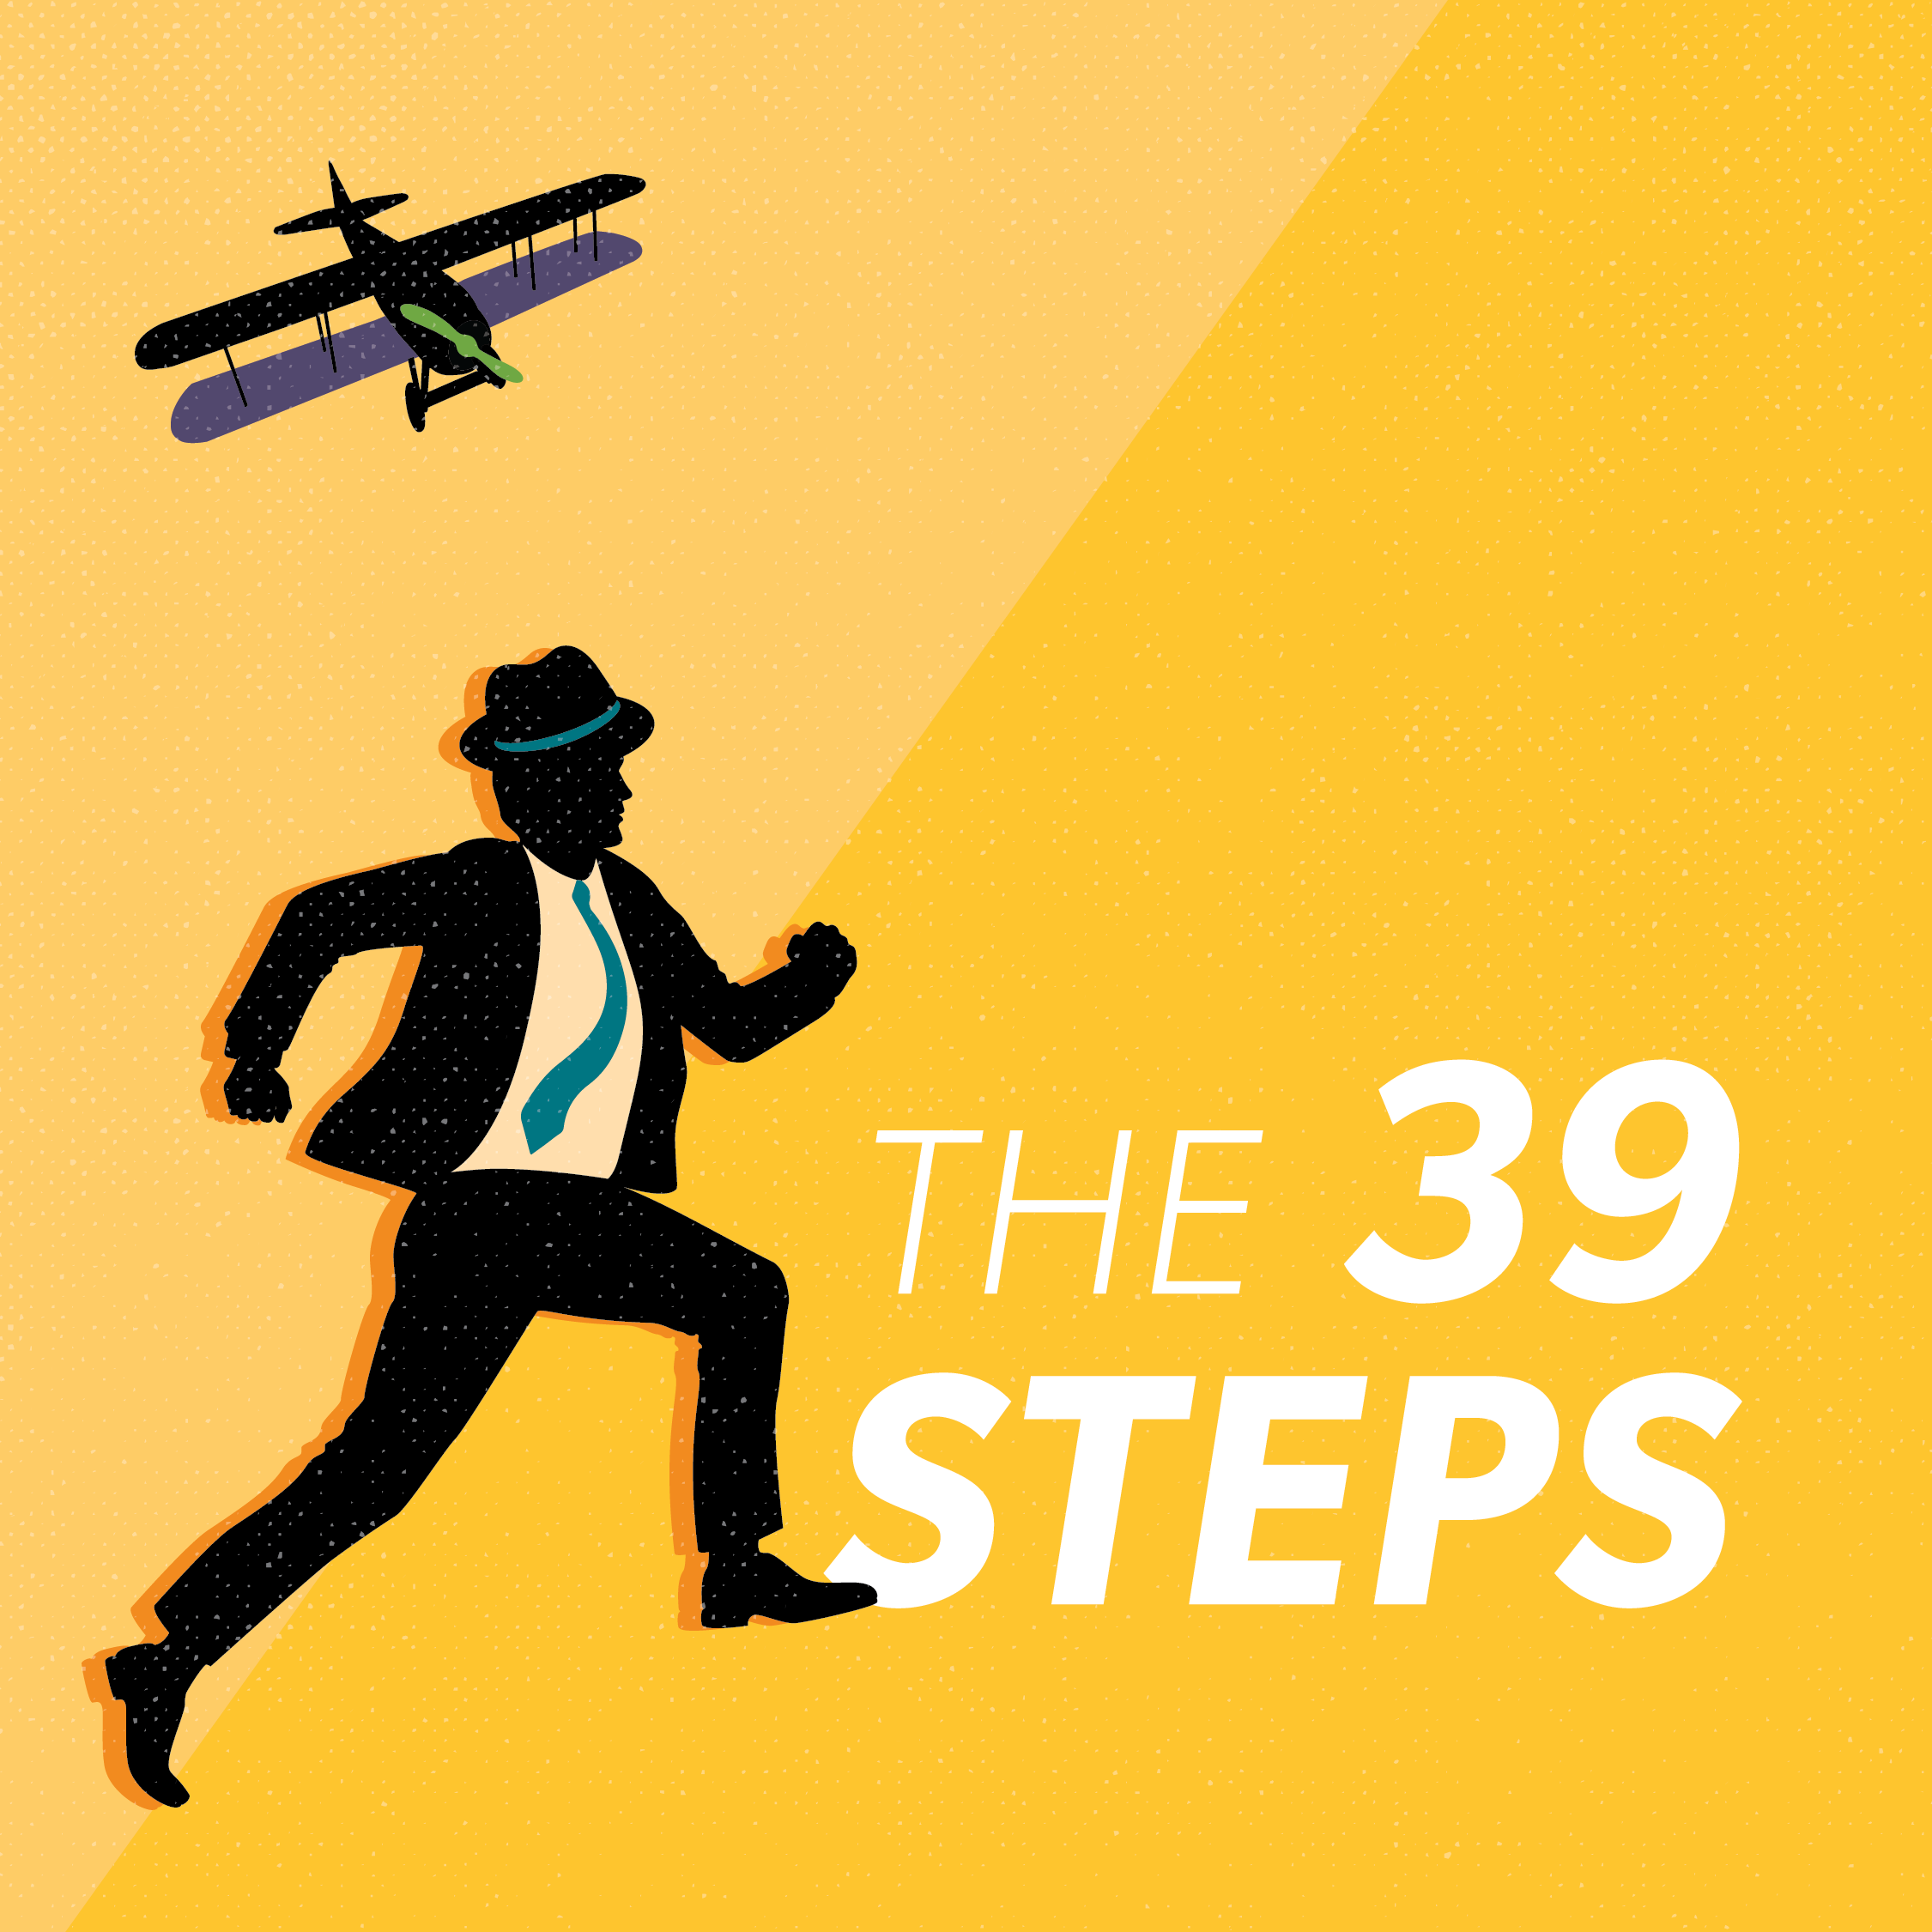 LA-ShowImagery-THE39STEPS-03.png